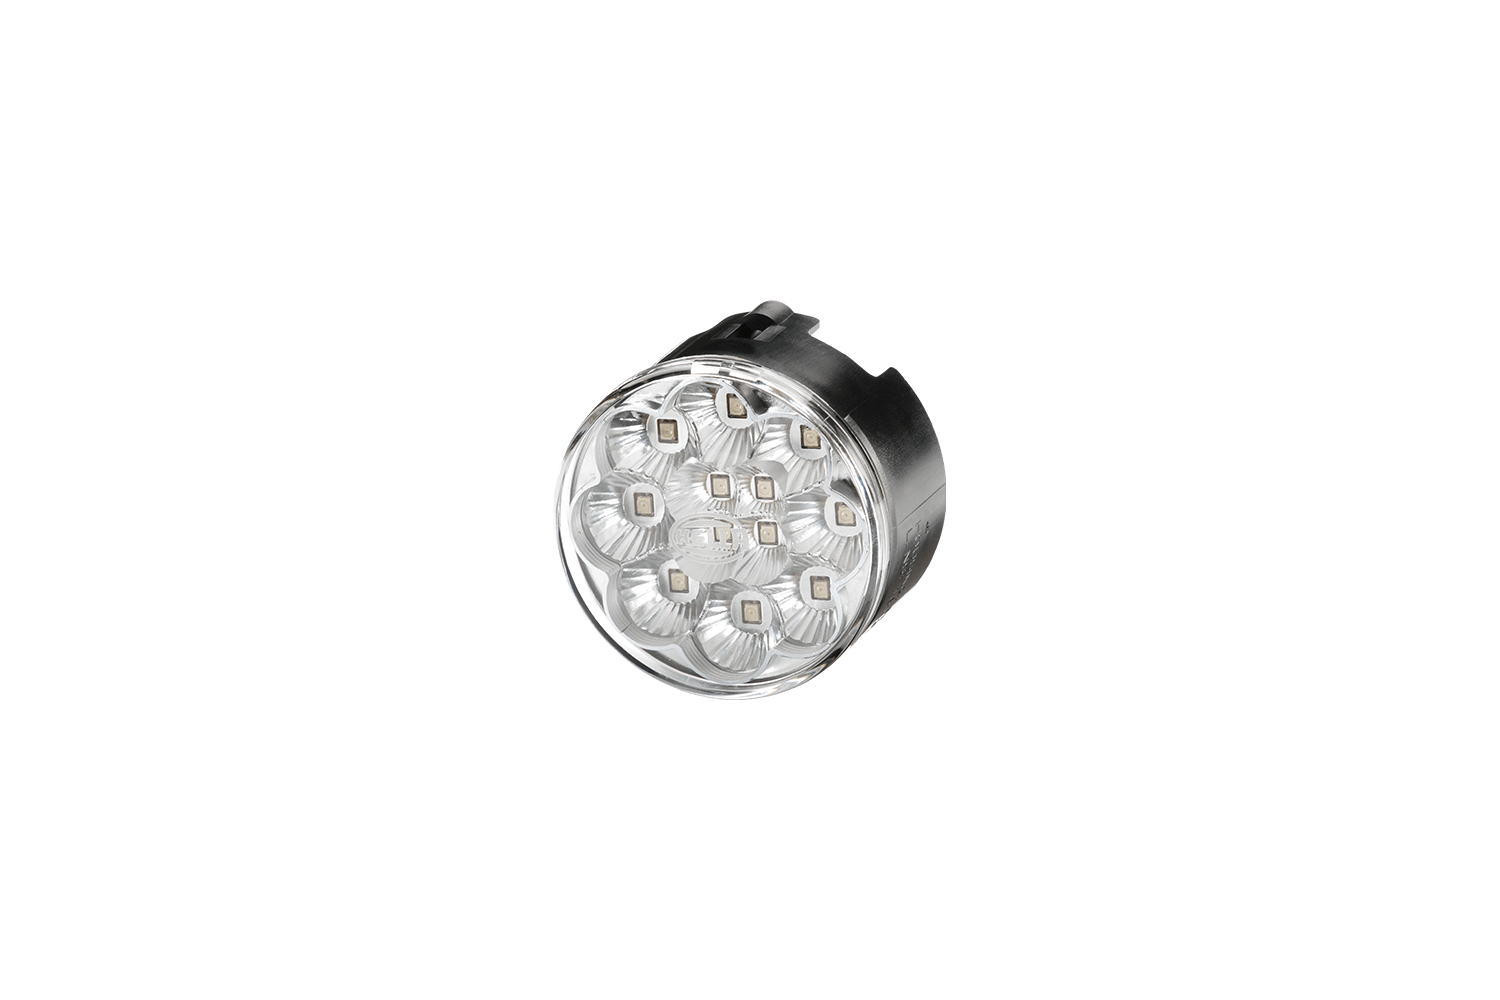 LED position lamp 66 mm from Hella offered by Patlon